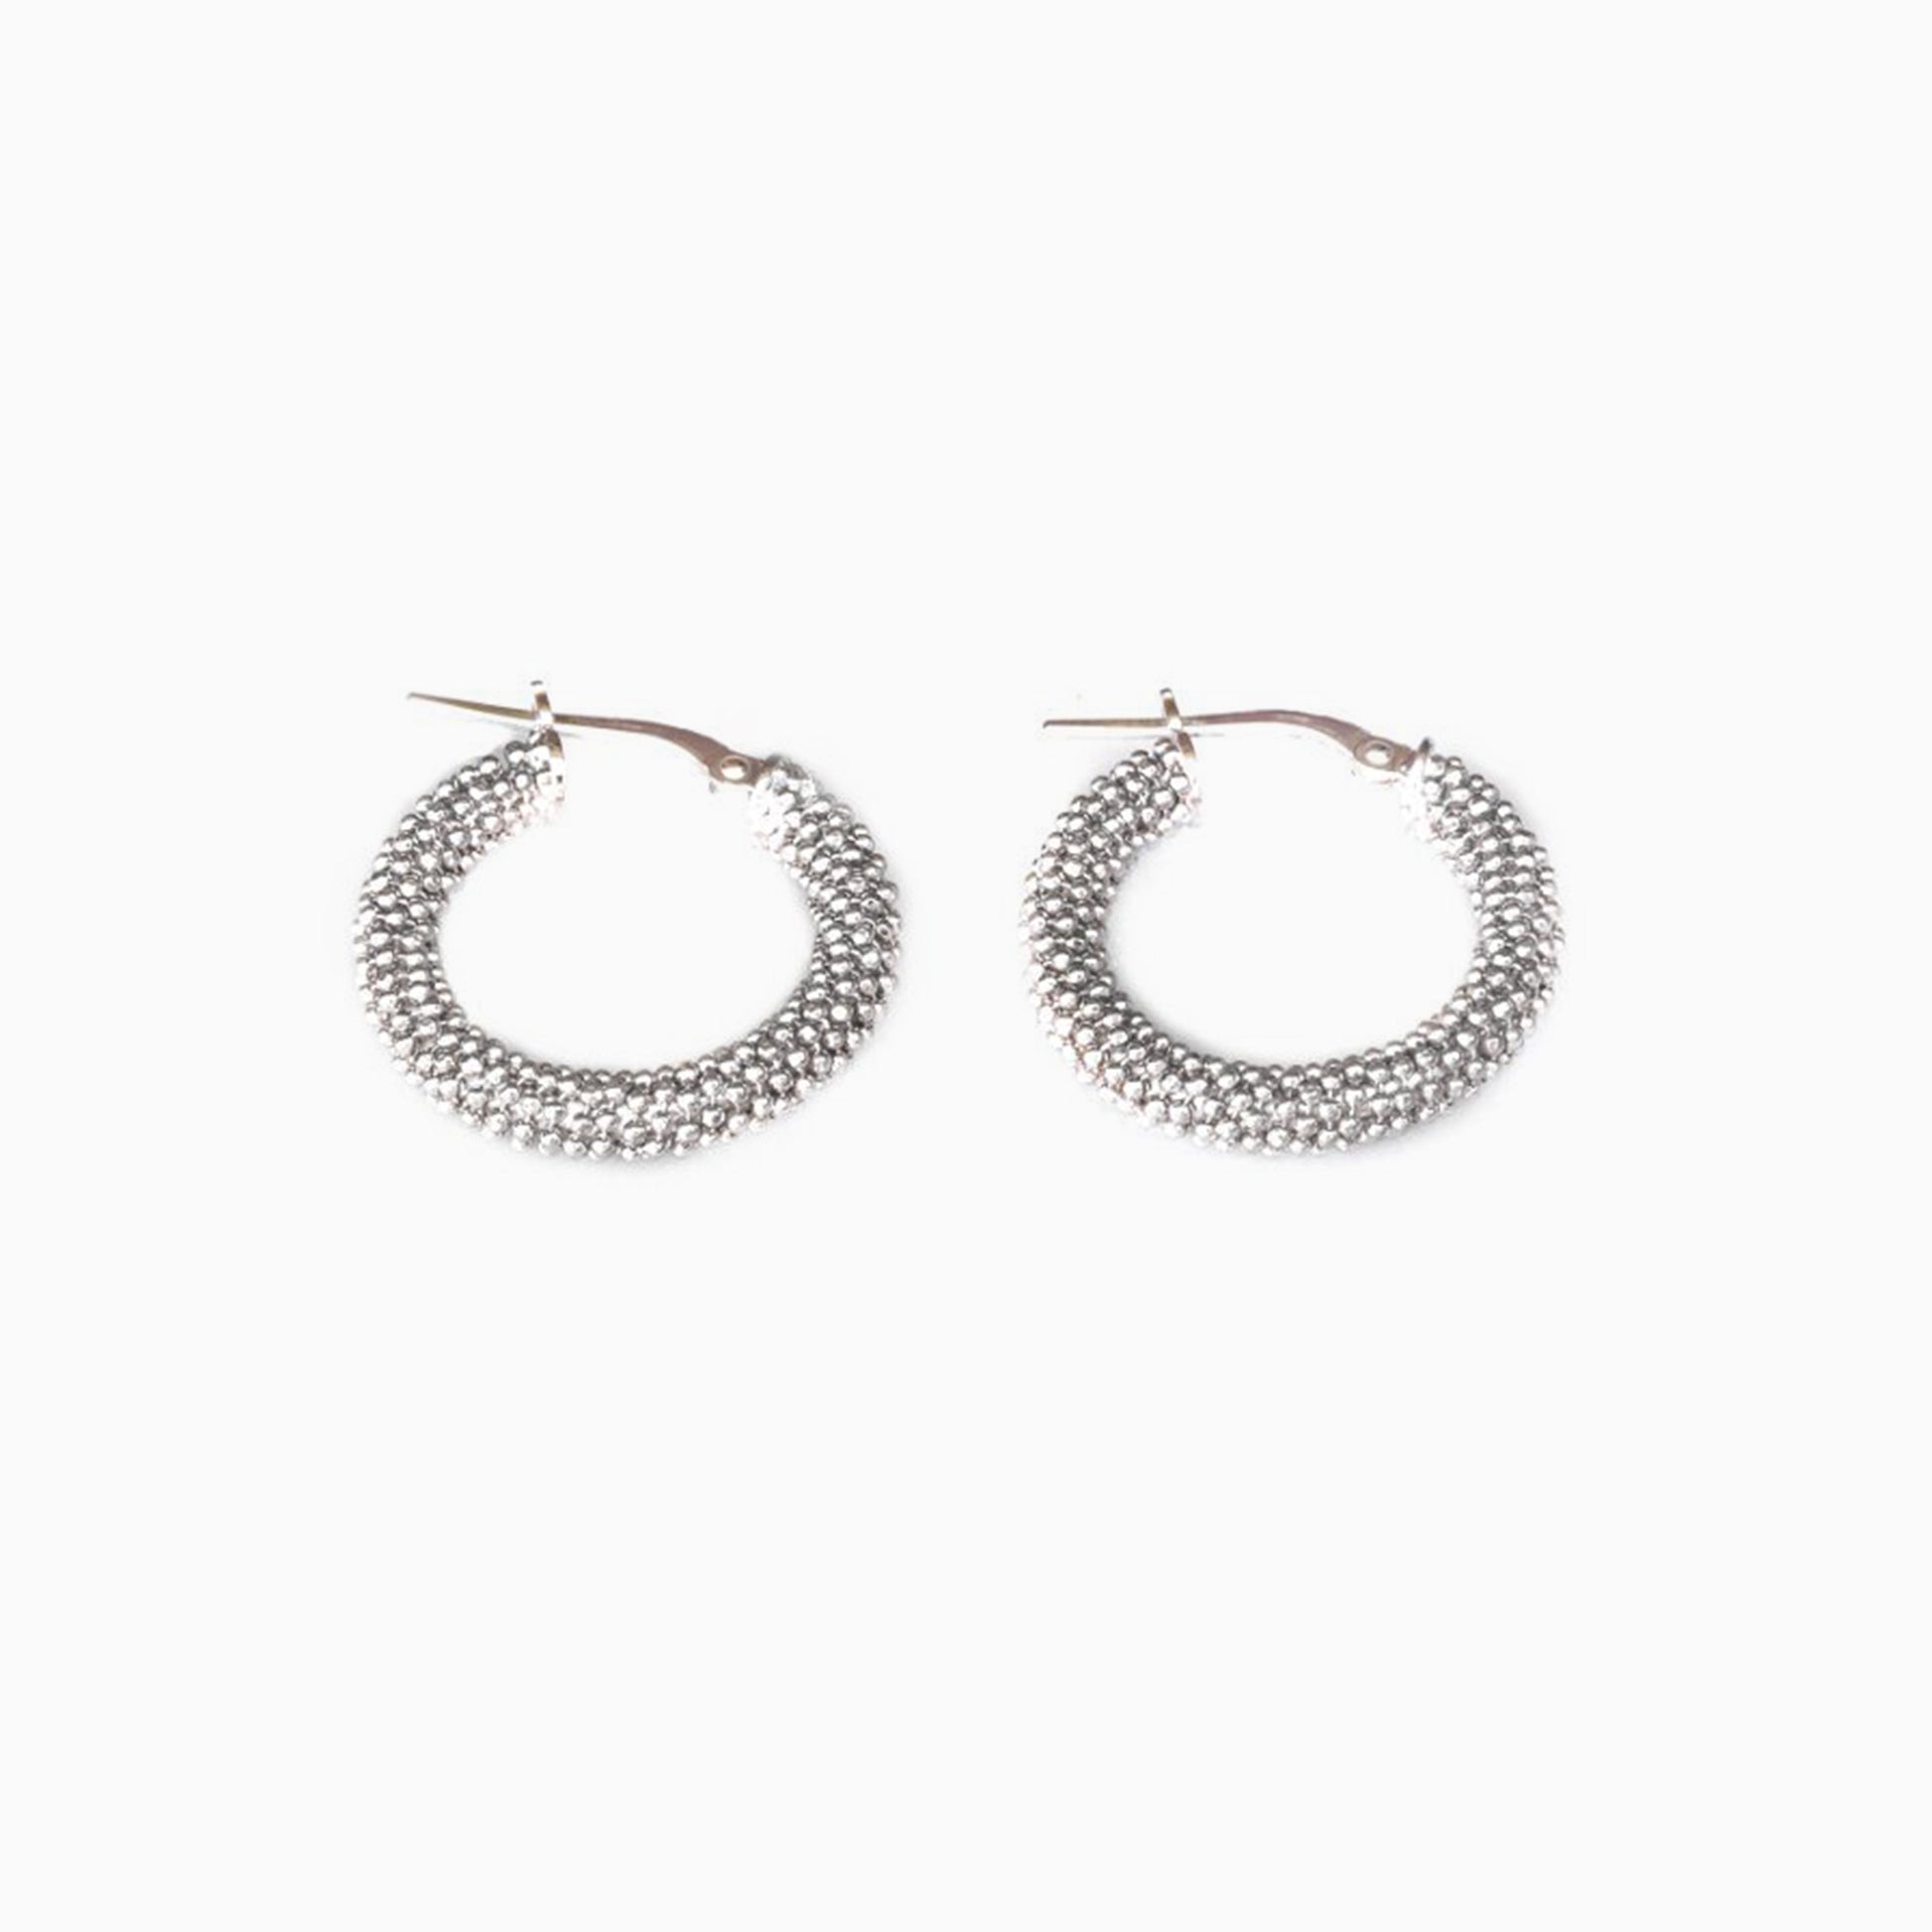 White Gold Plated Mesh Earrings on a white background